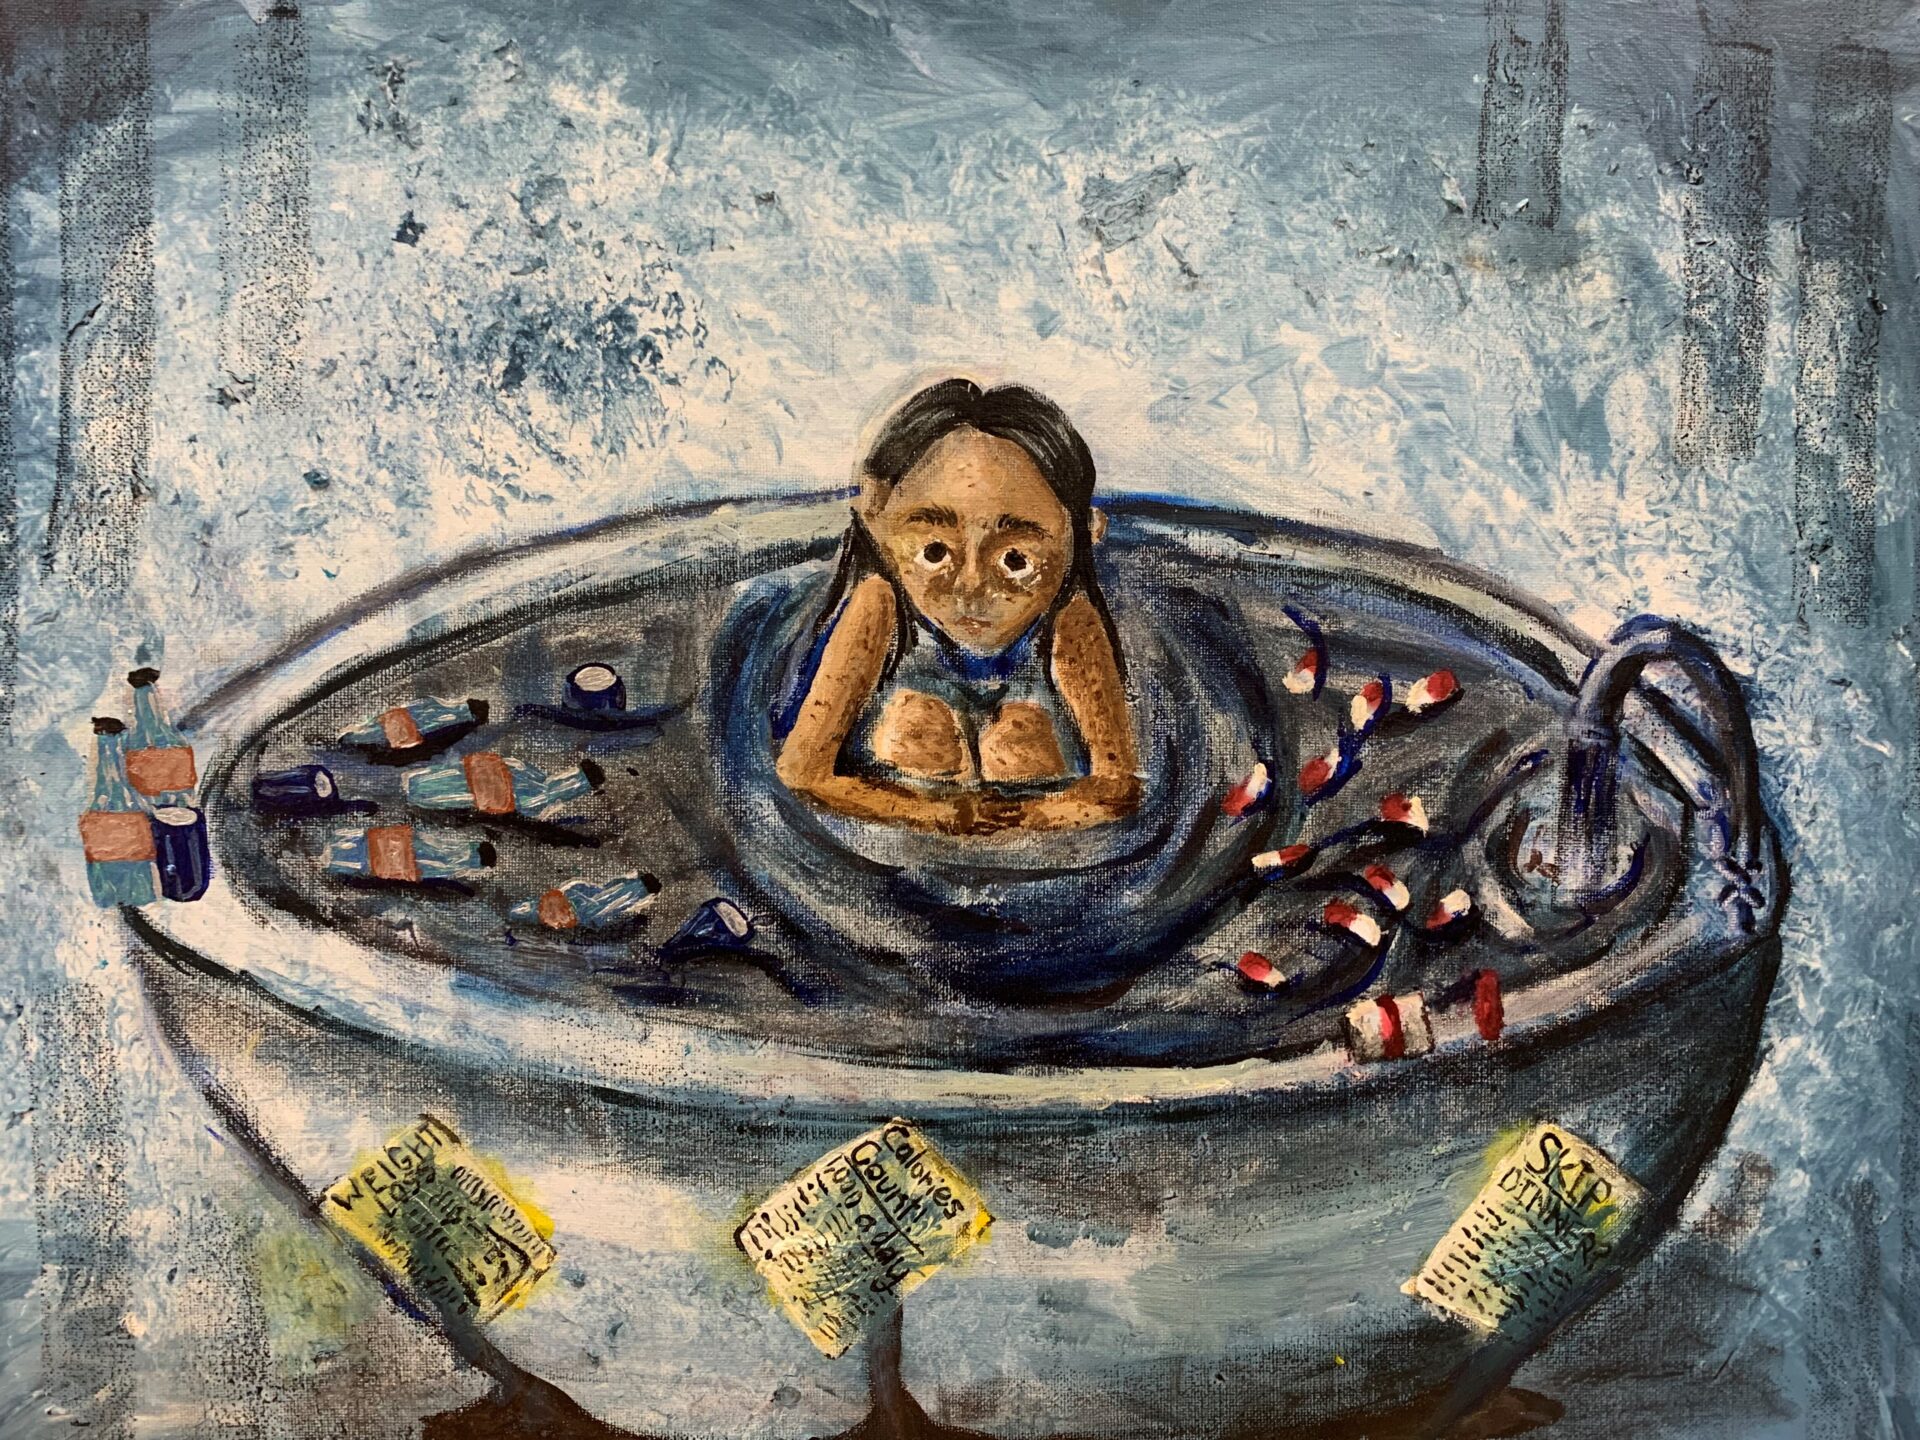 47. Sofia Gonzalez, 'Drowning', paint, crayon, marker and pencil, Year 8, St Clare's High School, Taree